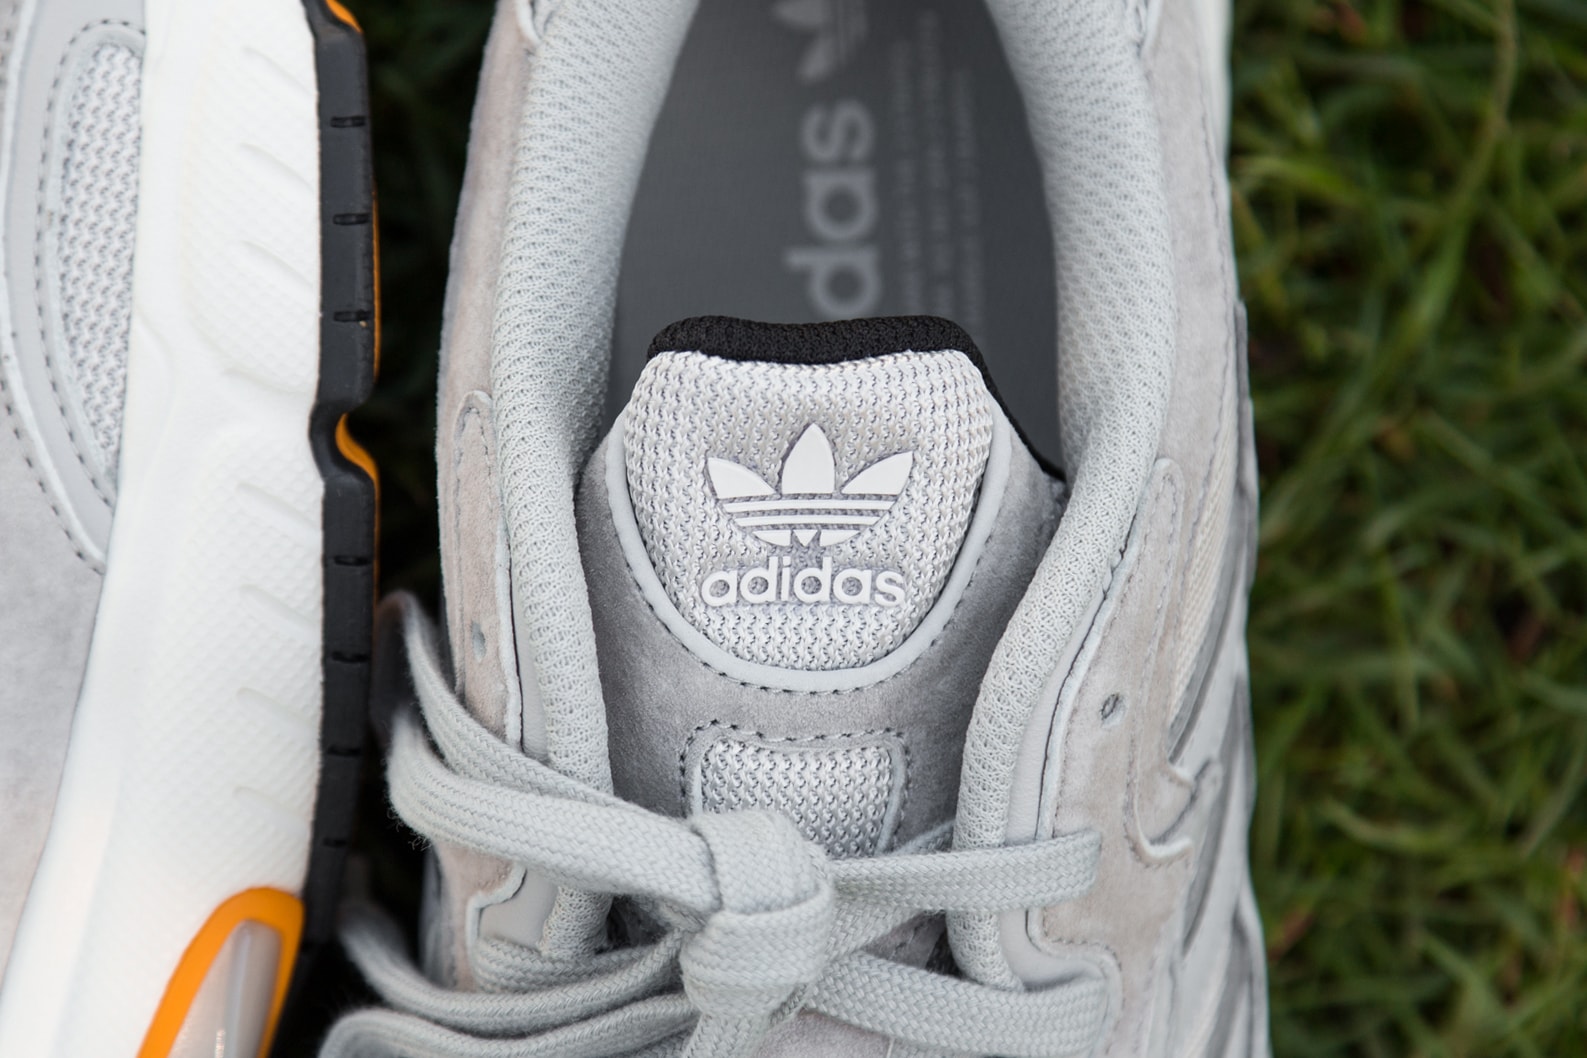 adidas Originals "Temper Run" Stone Grey 2018 Closer Look Kicks Shoes Sneakers Trainers Retail Price £109 GBP $149 USD Saturday May 5 Release Date First Released 2014 Up Close Details Hanbury Street London Exclusive